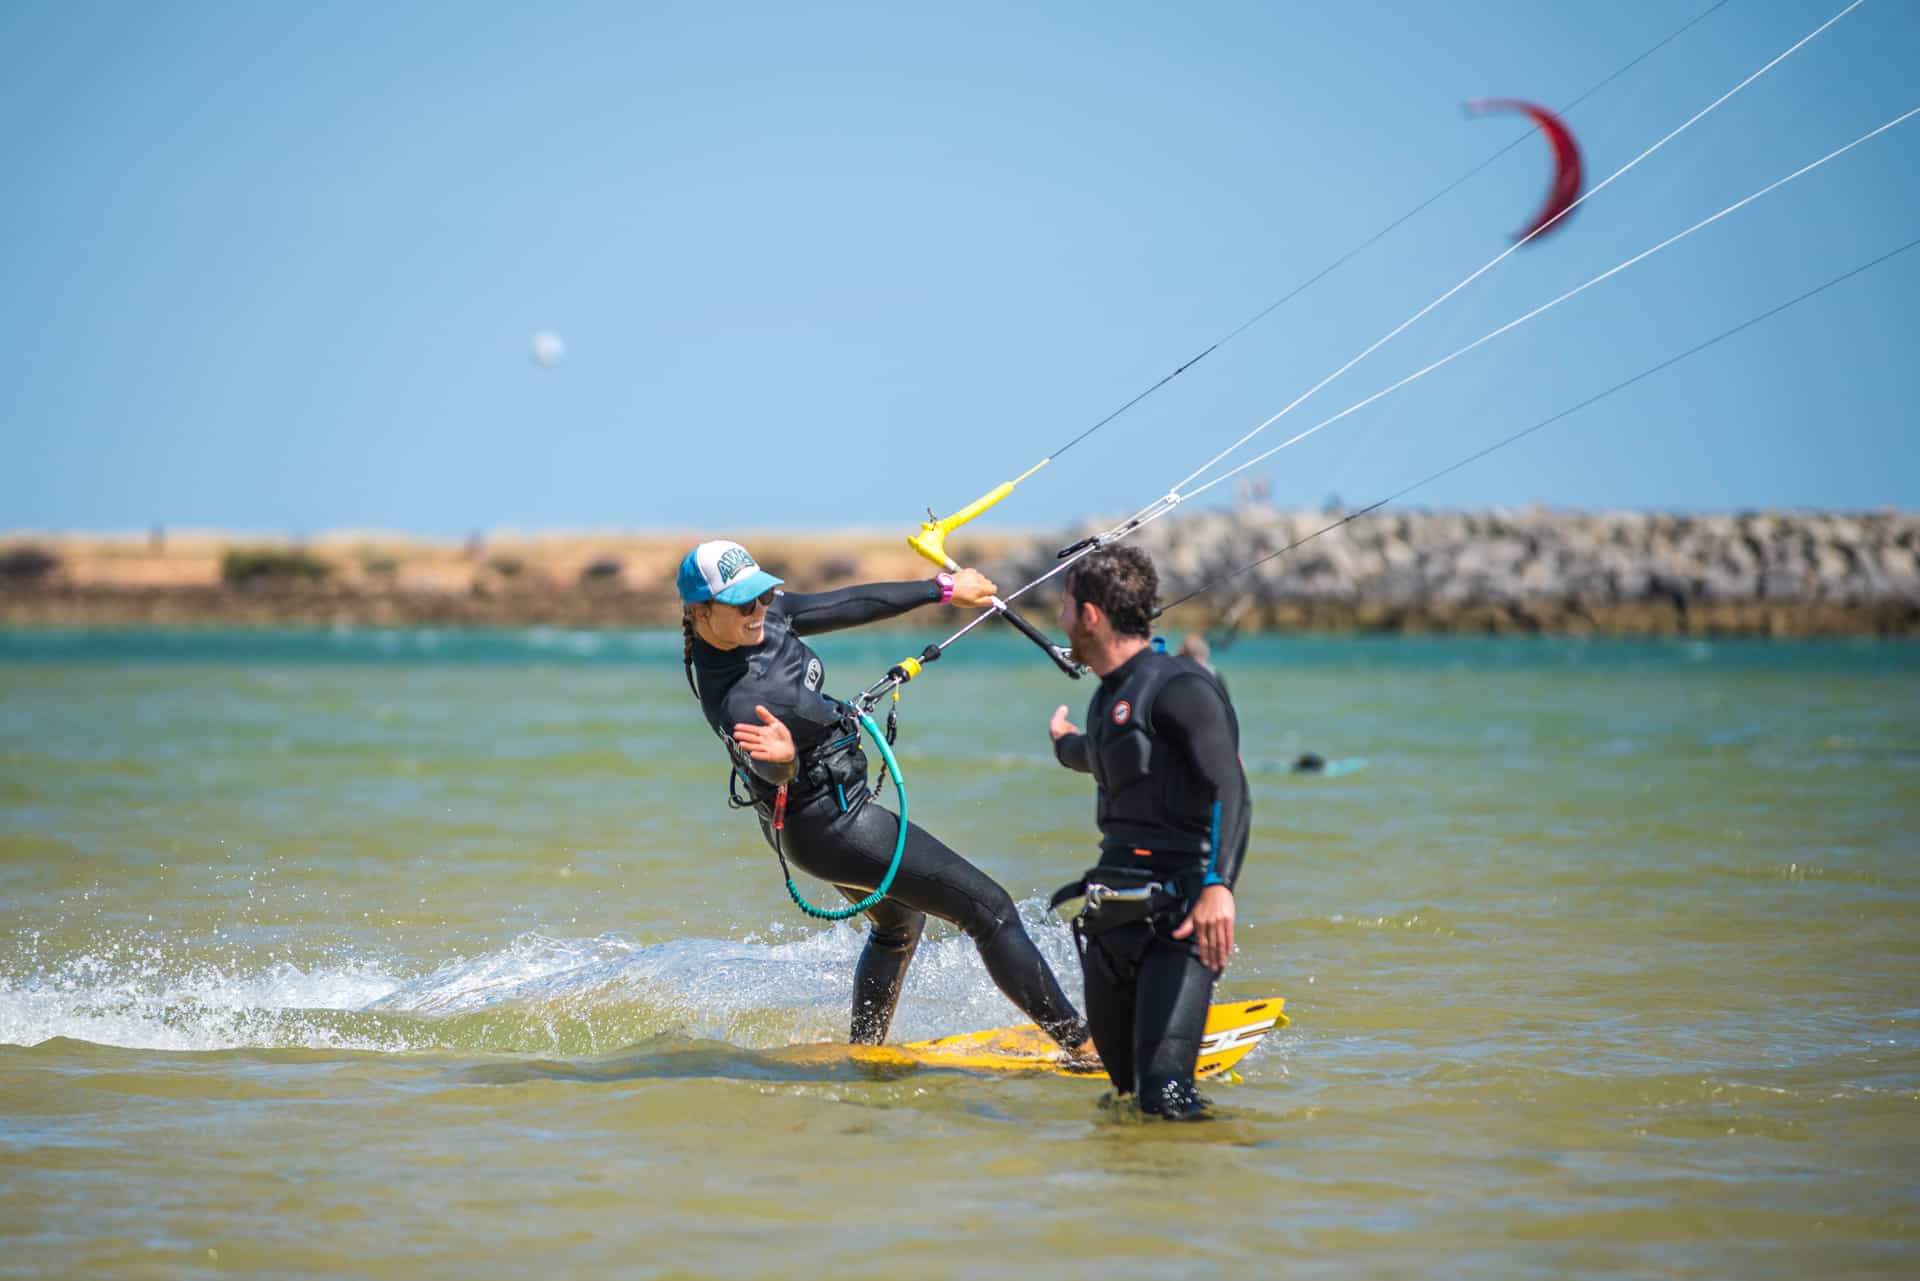 Instructor and student during kitesurfing lesson in Lagos.